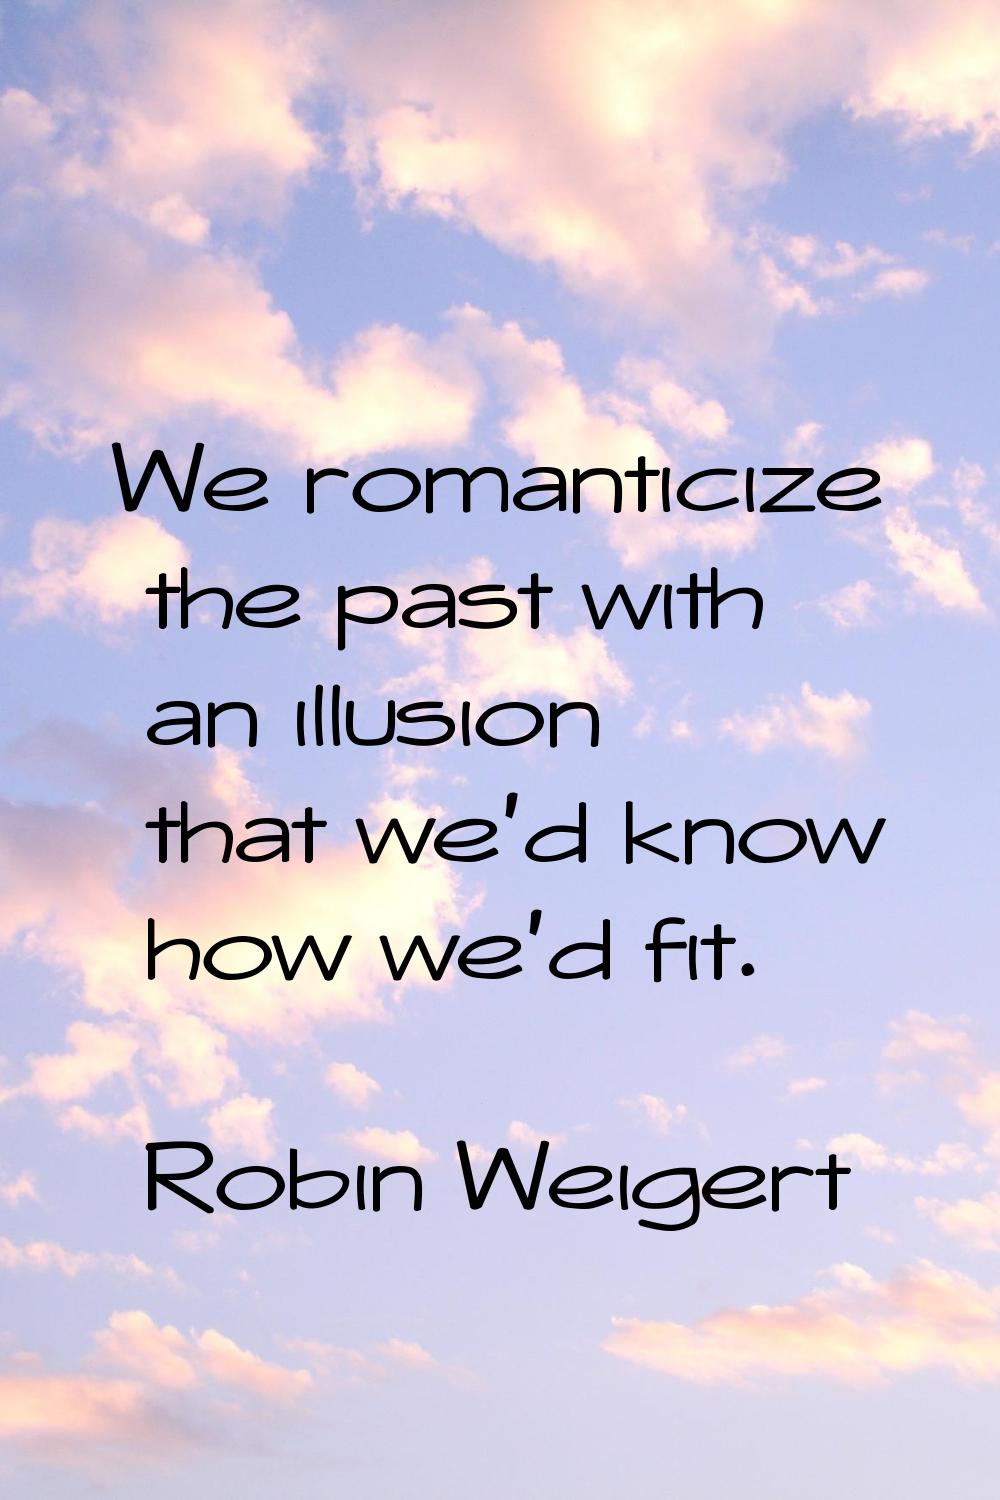 We romanticize the past with an illusion that we'd know how we'd fit.